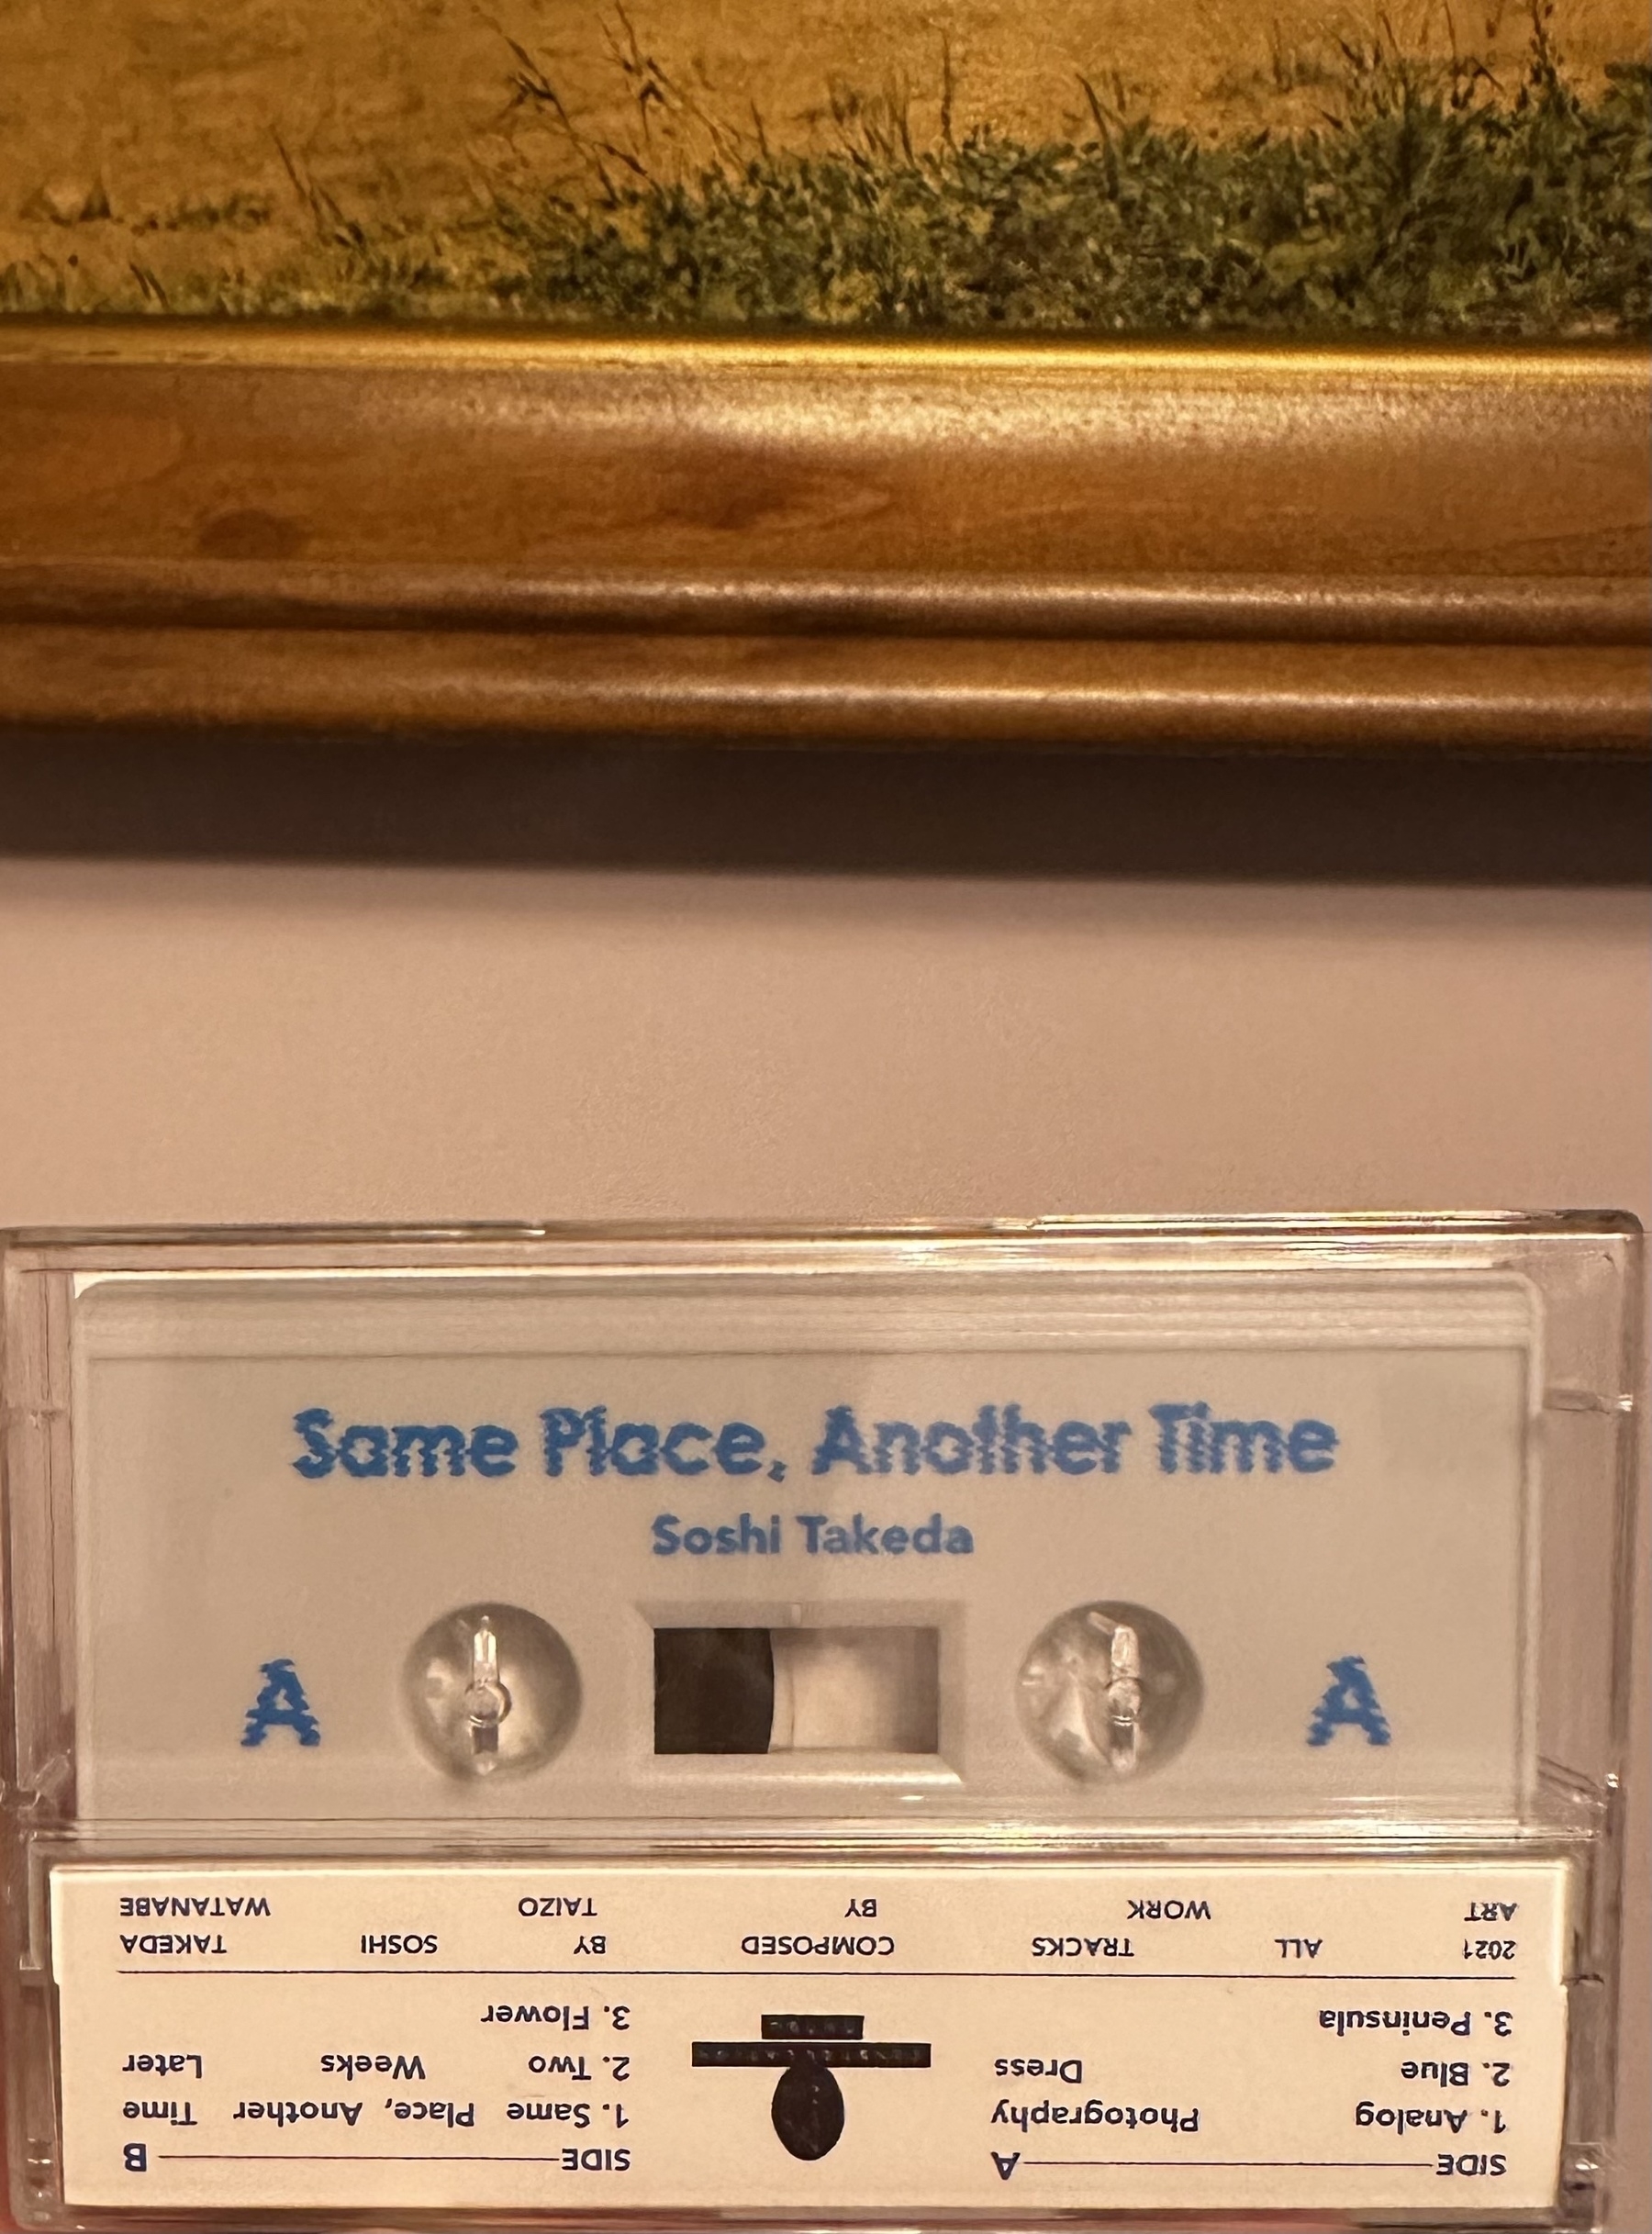 White cassette of Same Place, Another Time by Soshi Takeda. A painting is visible above it 